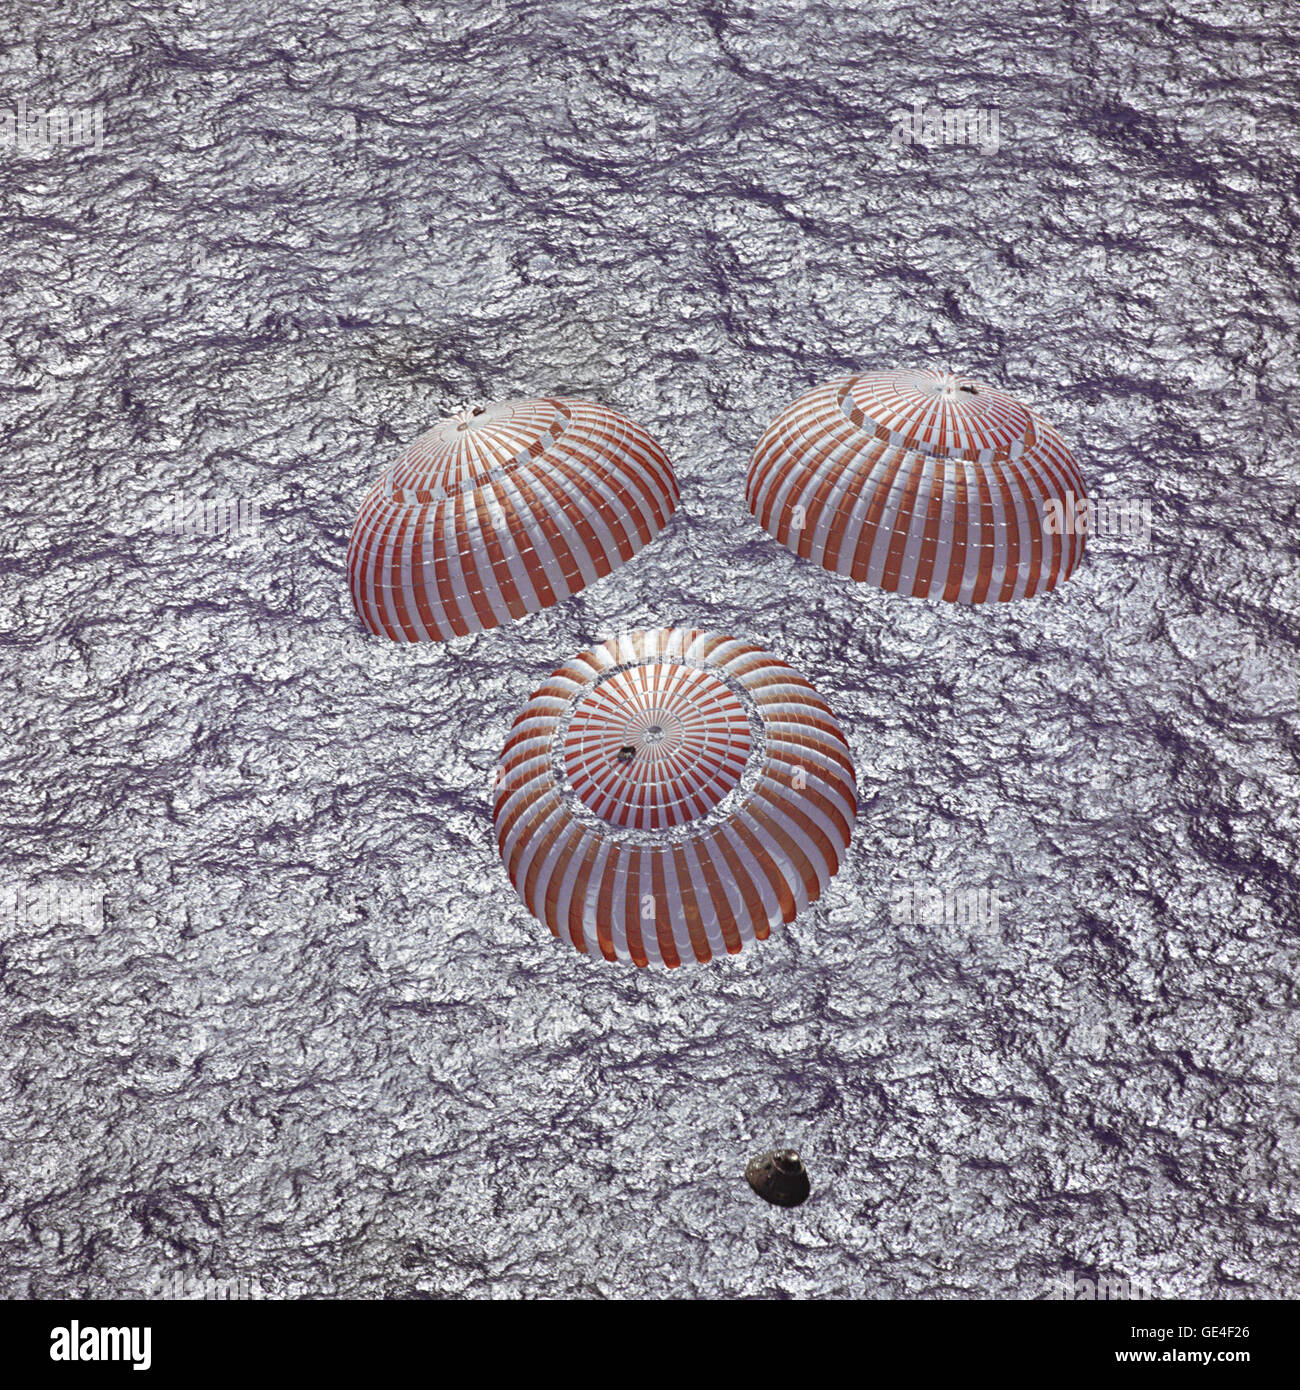 The Apollo 16 command module, with astronauts John W. Young, Thomas K. Mattingly II and Charles M. Duke Jr. aboard, nears splashdown in the central Pacific Ocean to successfully conclude a lunar landing mission. This overhead picture was taken from a recovery aircraft seconds before the spacecraft hit the water. The splashdown occurred at 290:37:06 ground elapsed time at 1:45:06 a.m. (CST), April 27, 1972, at coordinates of 00:43.2 degrees south latitude and 156:11.4 degrees west longitude, a point approximately 215 miles southeast of Christmas Island.  Image # : S72-36287 Stock Photo